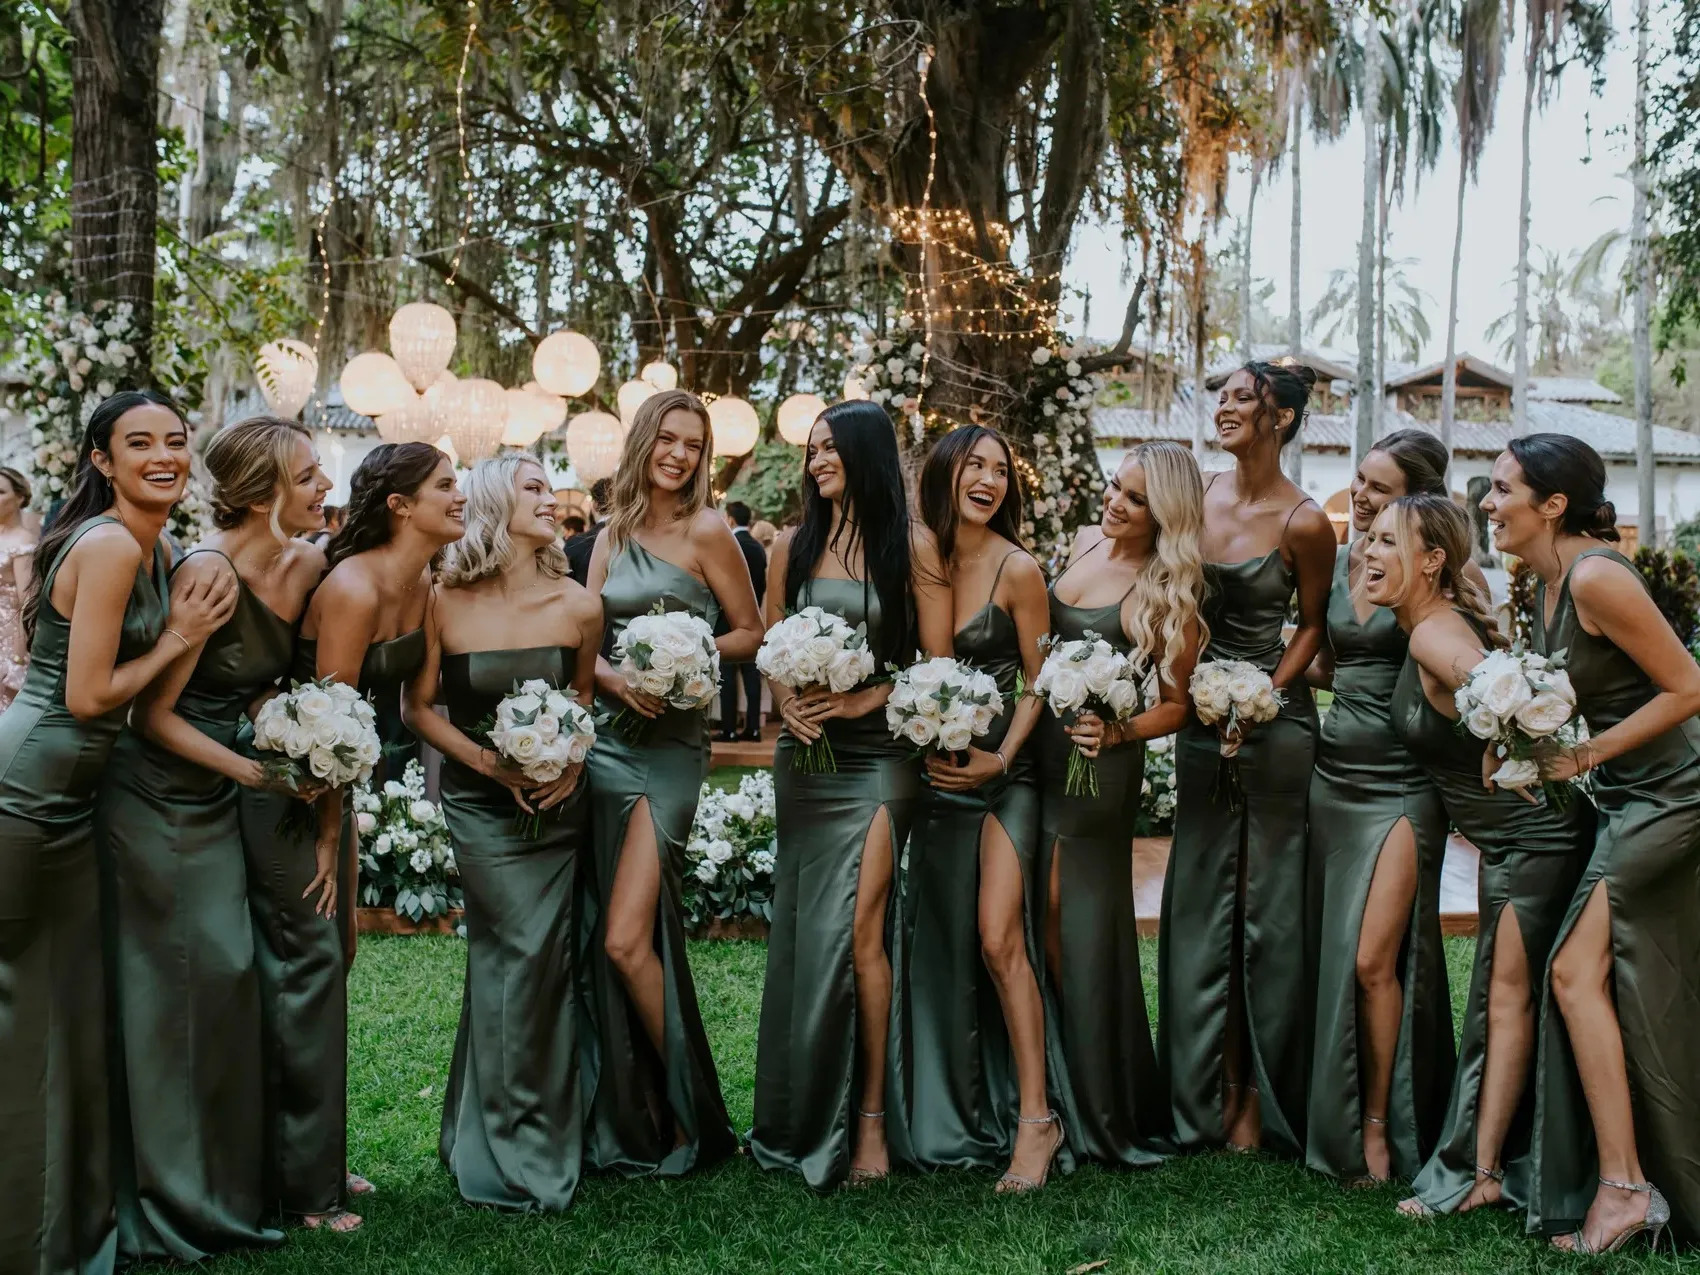 Bridesmaids in their bridesmaid dresses with different designs